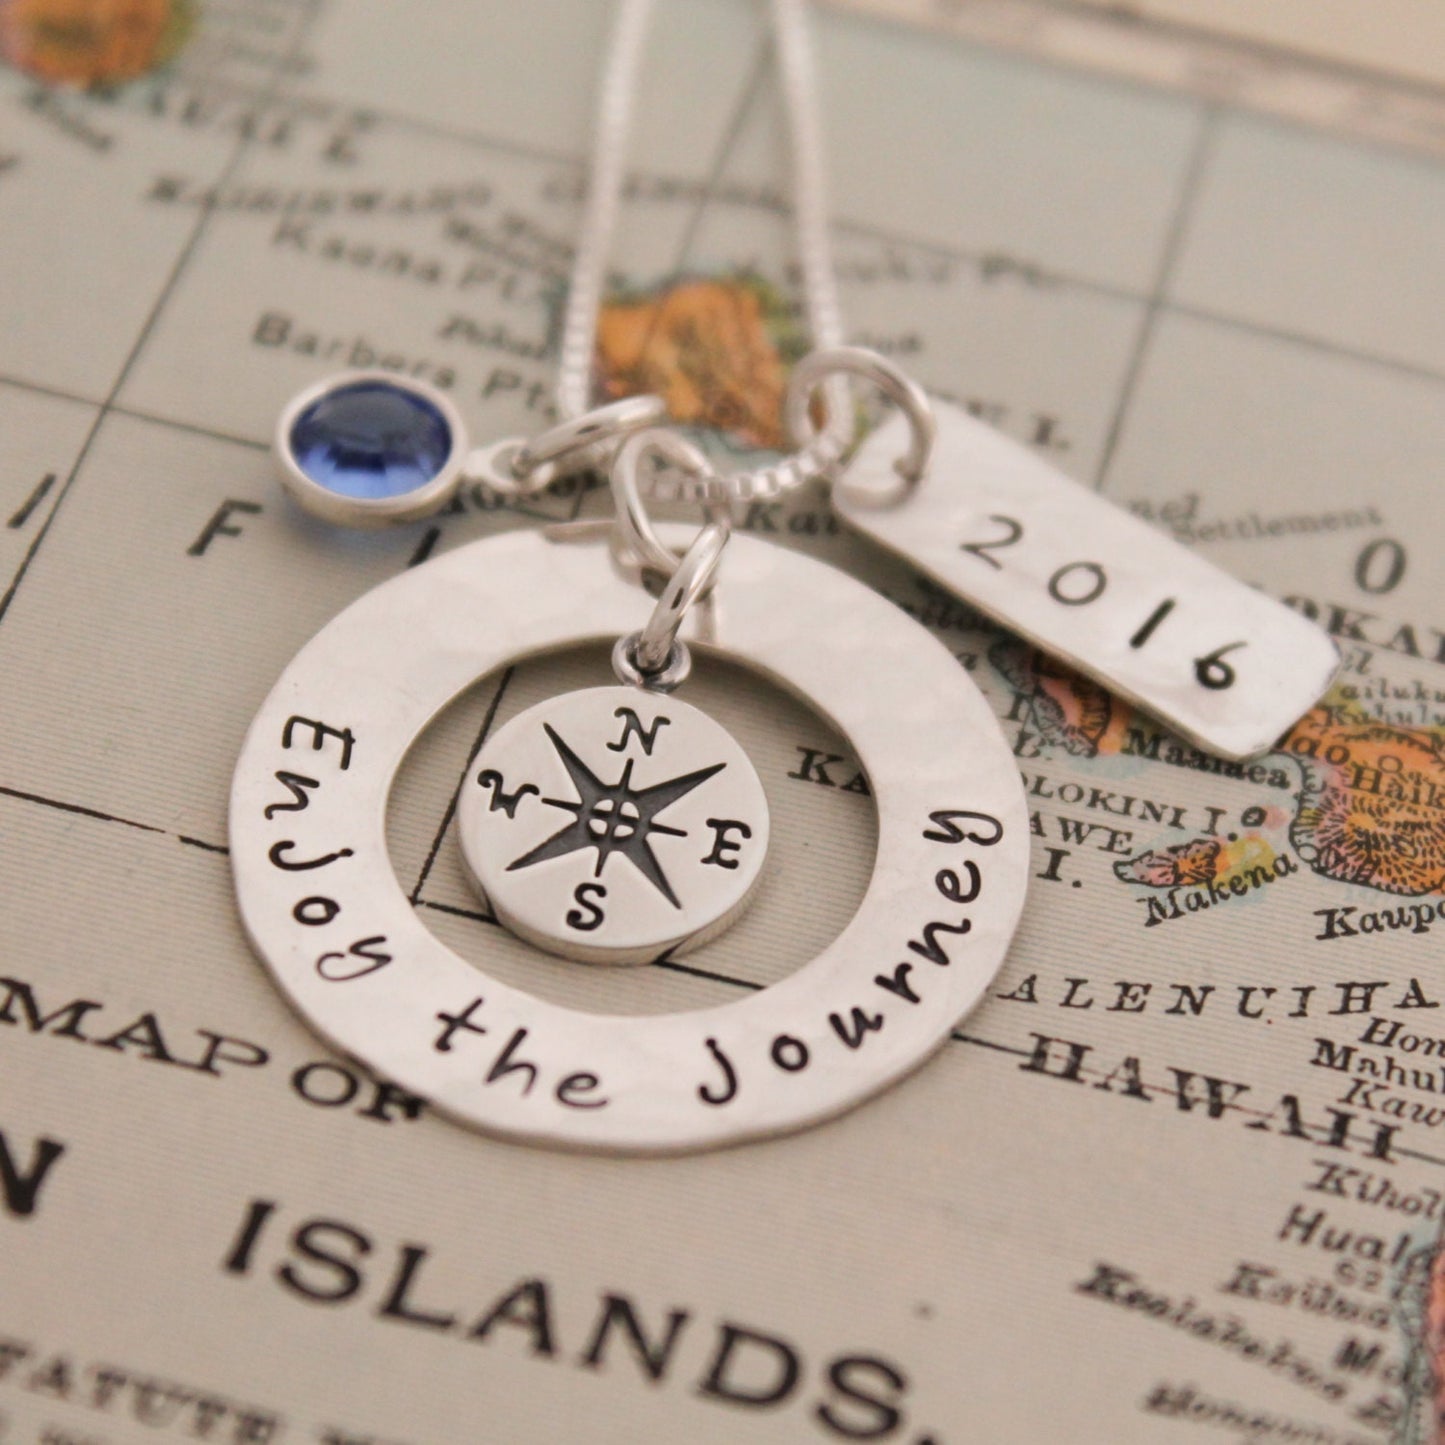 Enjoy the Journey Necklace, Compass Necklace, Travel Jewelry, Deployment, Graduation Gift, Hand Stamped Necklace, Personlized Jewelry